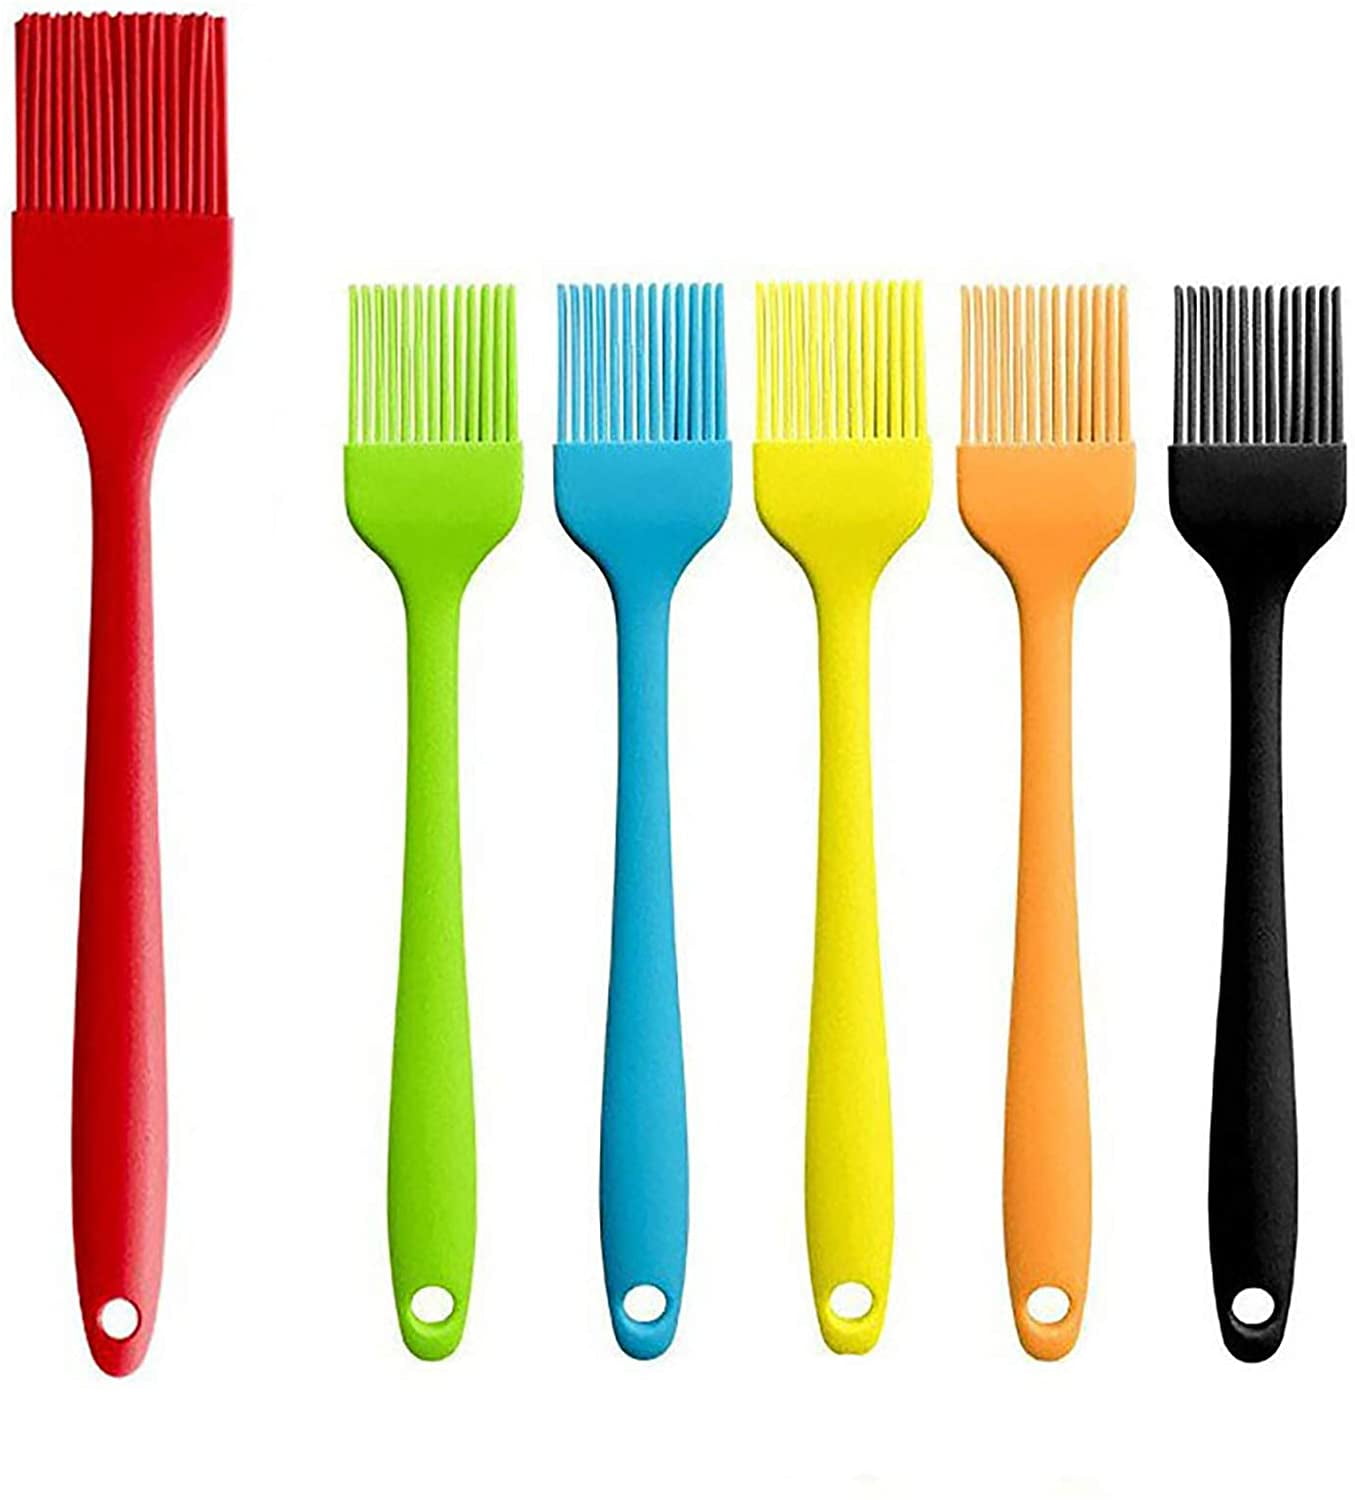 6 Pc Silicone Pastry Basting Brush Set Baking Bakeware Oil Cream Heat Resistant BBQ Tool Silicone 2 